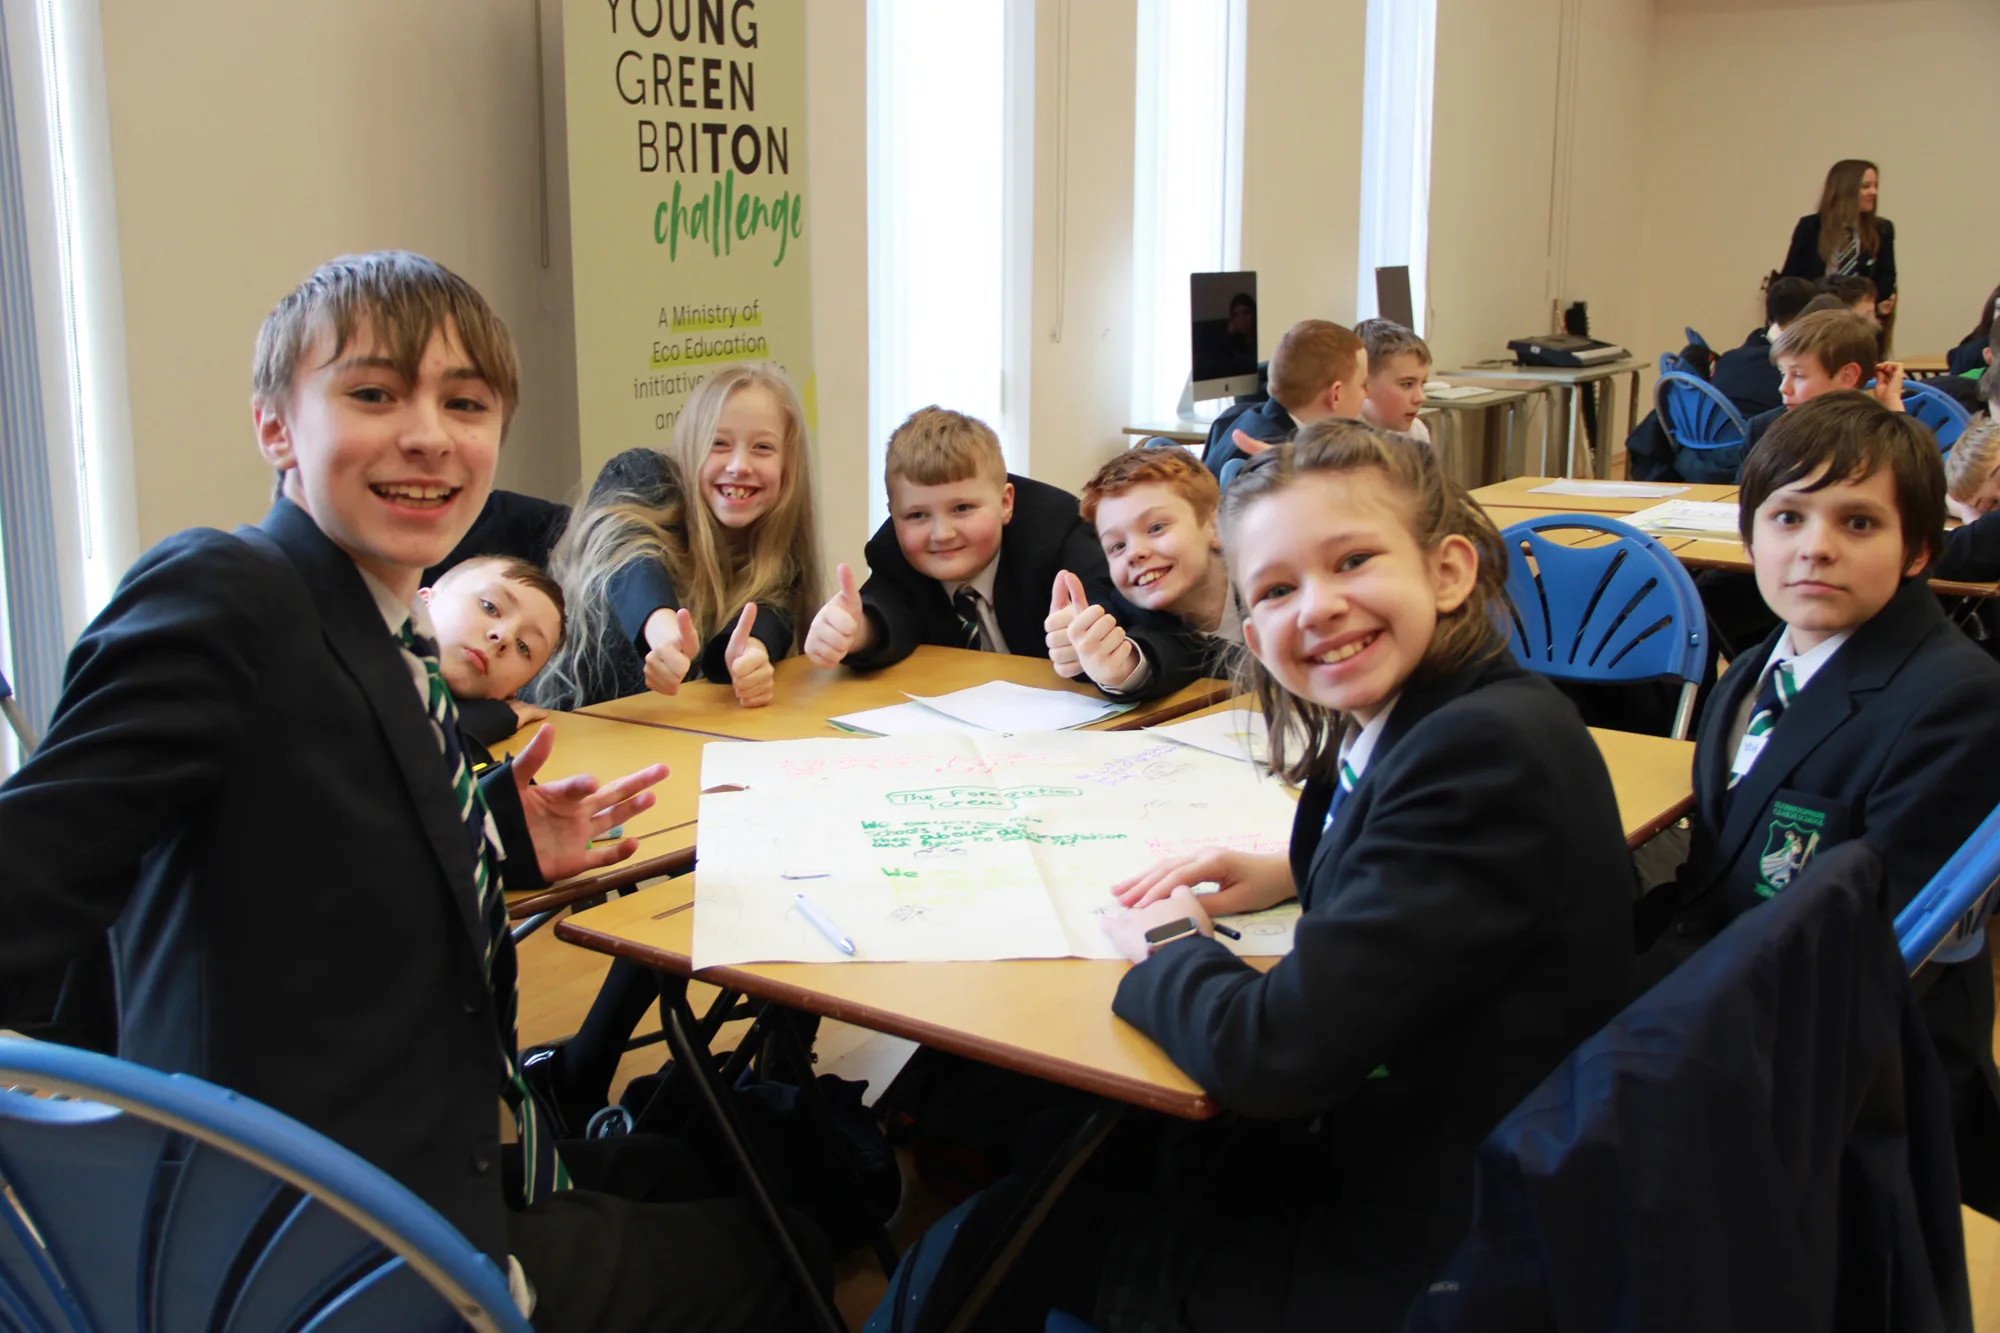 School challenge empowers young people to make positive local impact